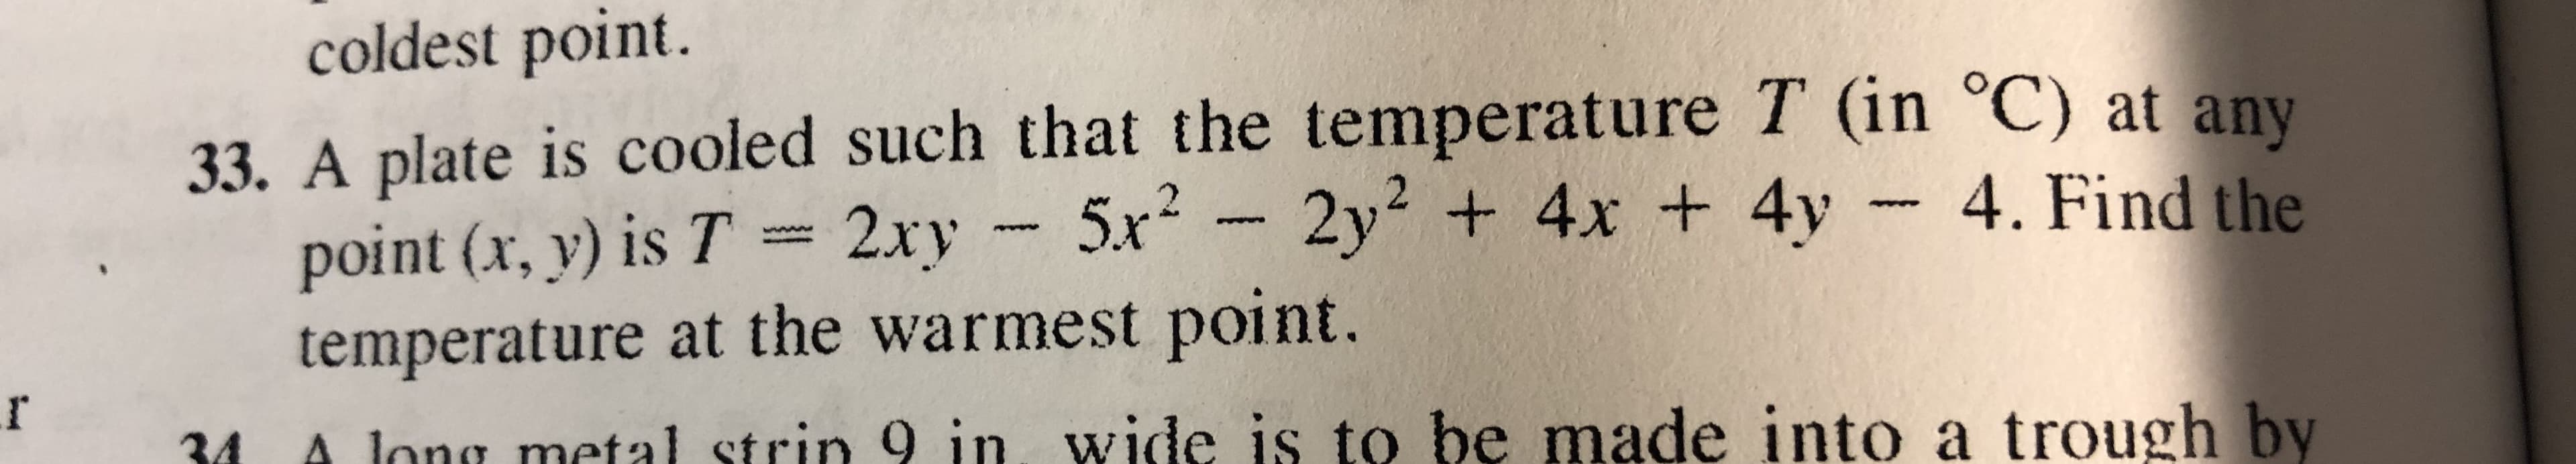 coldest point.
33. A plate is cooled such that the temperature T (in oC) at any
point (x,y) İs7-2xy-5x2-2y2 + 4x + 4y-4. Find the
temperature at the warmest point.
r4 A long metal strin 9 in wide is to be made into a trough by
